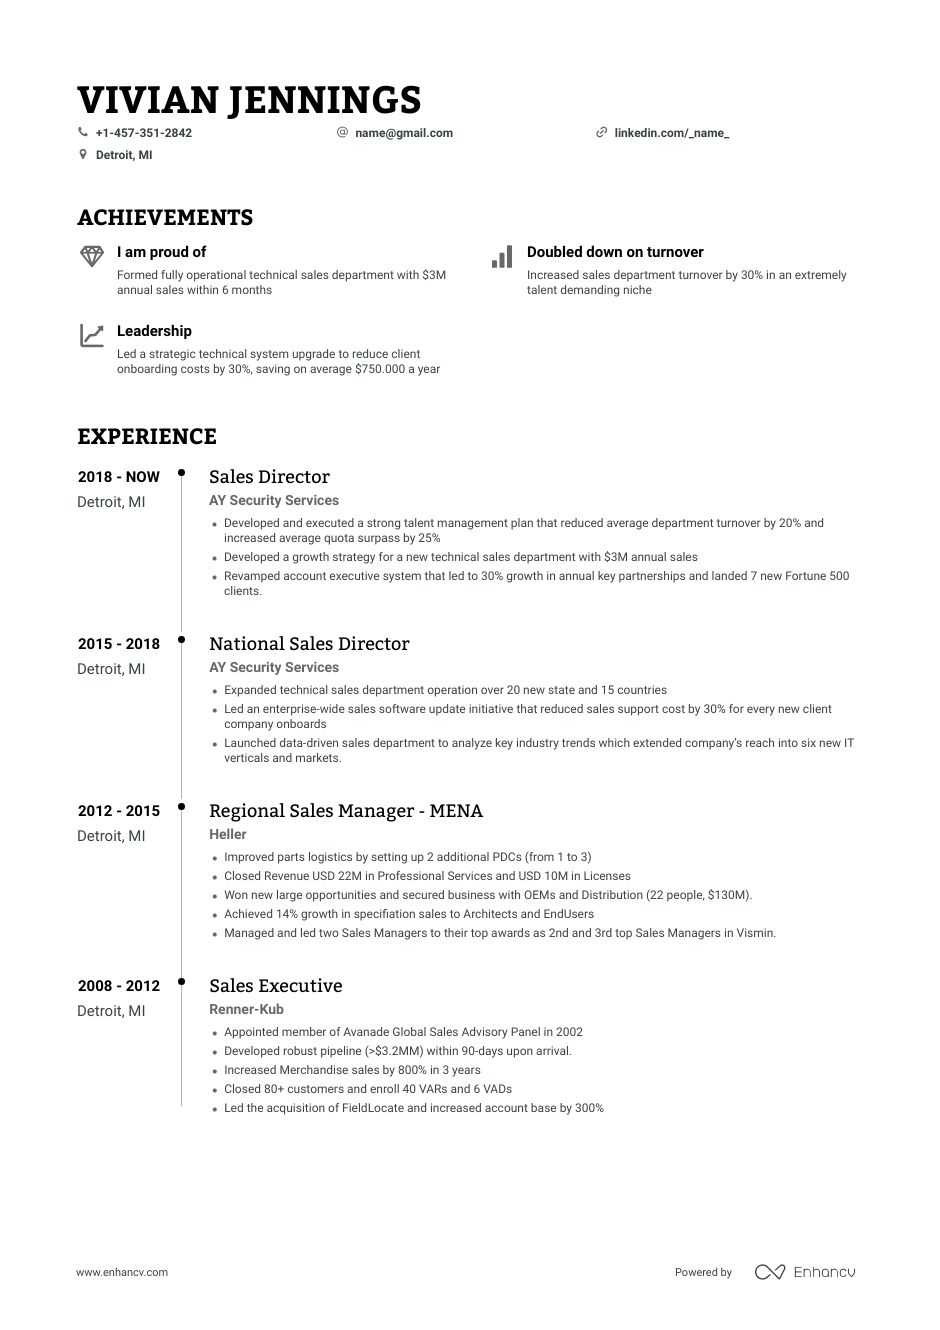 Director Of Sales and Marketing Resume Sample Sales Director Resume Examples: Templates & How-to Guide